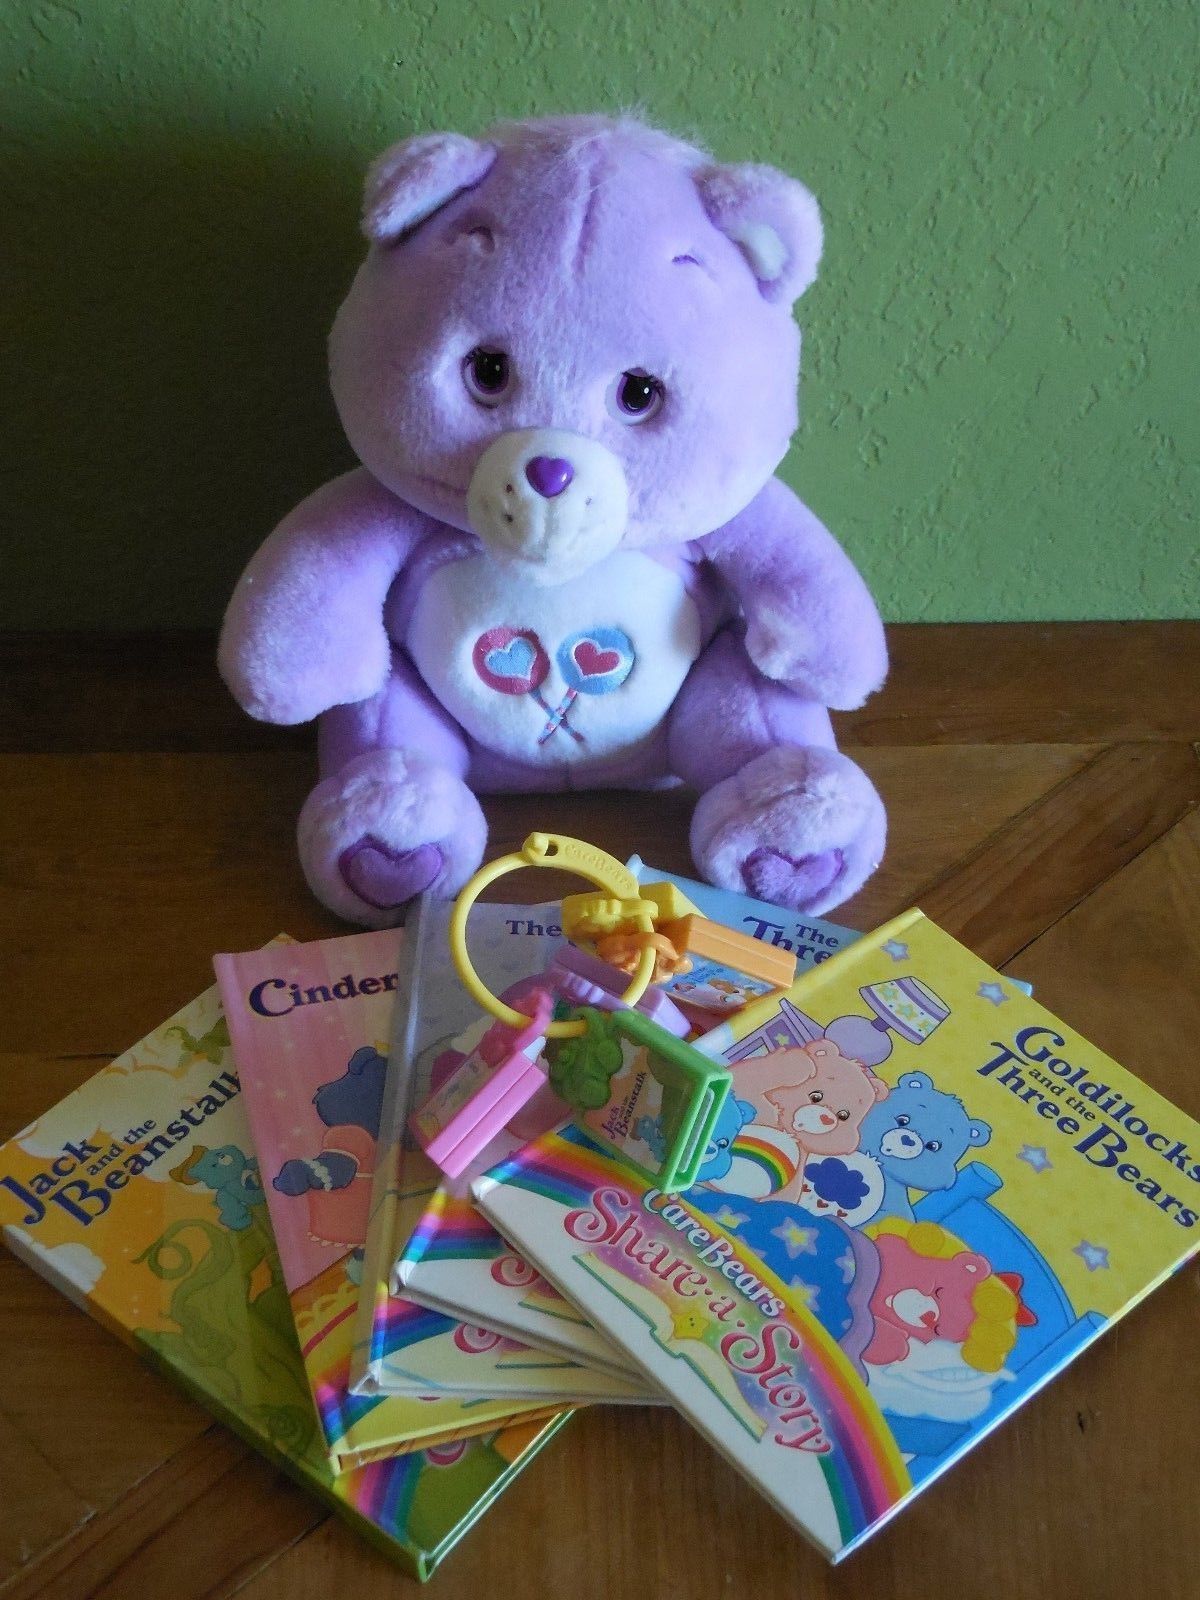 2004 Care Bears Share A Story Plush Talking Bear with 5 Books & Story Cartridges